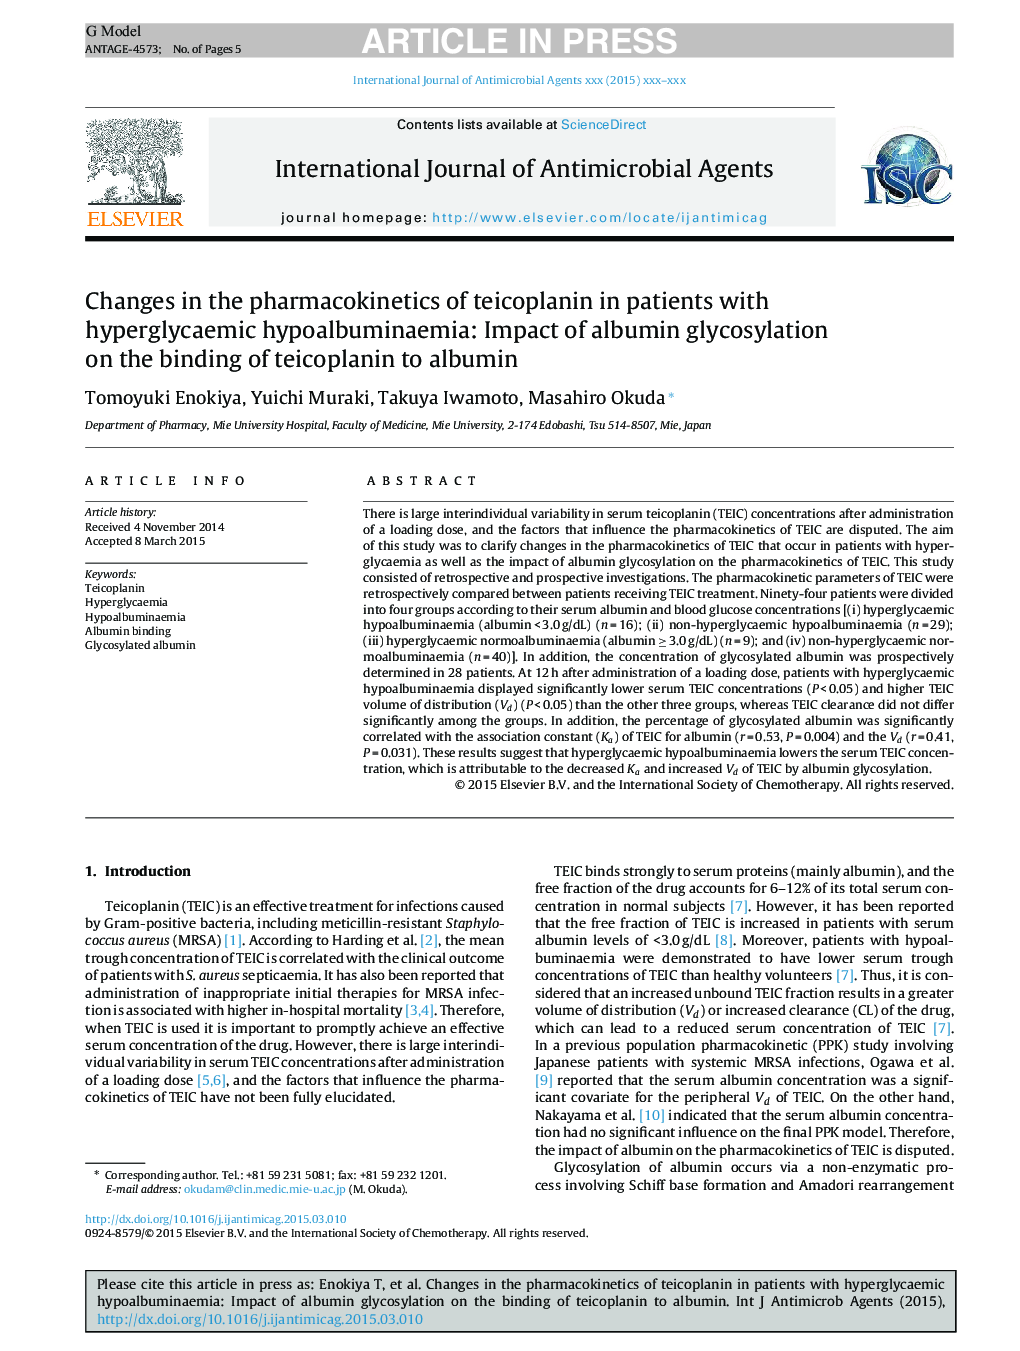 Changes in the pharmacokinetics of teicoplanin in patients with hyperglycaemic hypoalbuminaemia: Impact of albumin glycosylation on the binding of teicoplanin to albumin